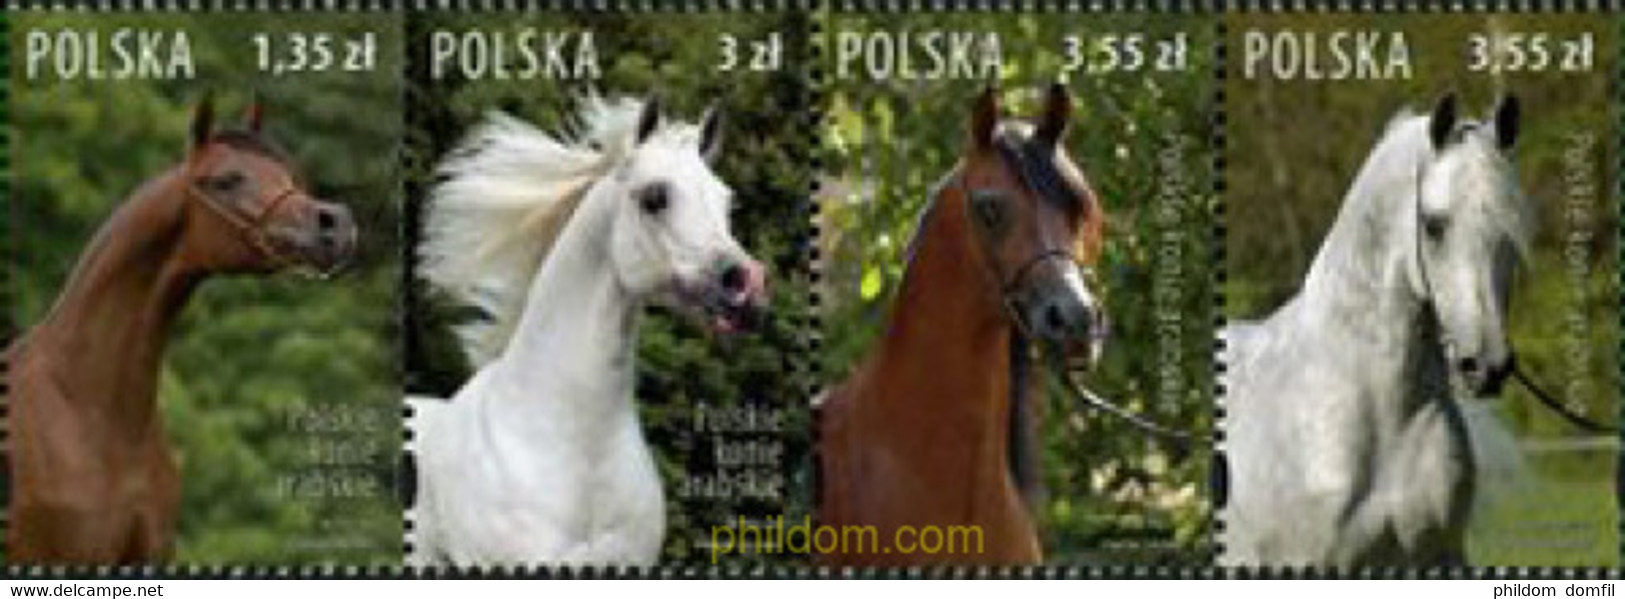 206639 MNH POLONIA 2007 CABALLOS - Unclassified